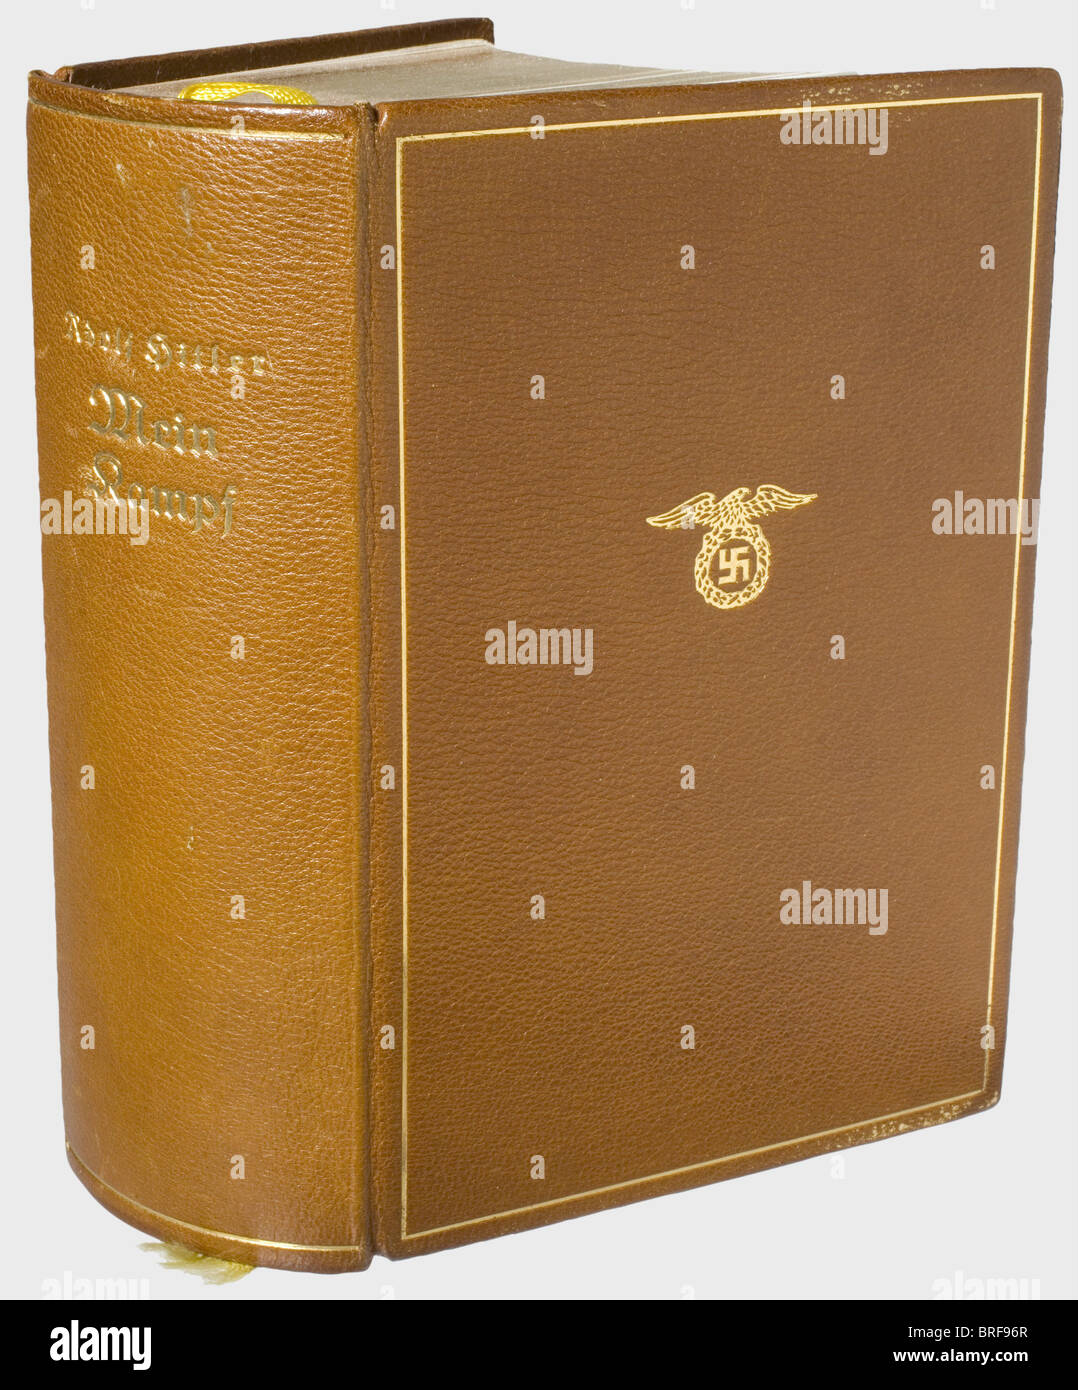 Ulrich von Hassell - a deluxe edition 'Mein Kampf'., One-volume anniversary edition commemorating the total circulation of one million copies. Brown, gold-embossed leather cover and top gilt edge. The cover with ex libris reading (transl.) 'Book Collection Ulrich von Hassell'. In original slipcase with marbled pattern. Extremely rare. Von Hassell was German ambassador to Rome and known for his nationalistic-conservative position. After the seizure of power by the National Socialists in 1933 he certainly did not hesitate to join the NSDAP. By working as a diplom, Stock Photo